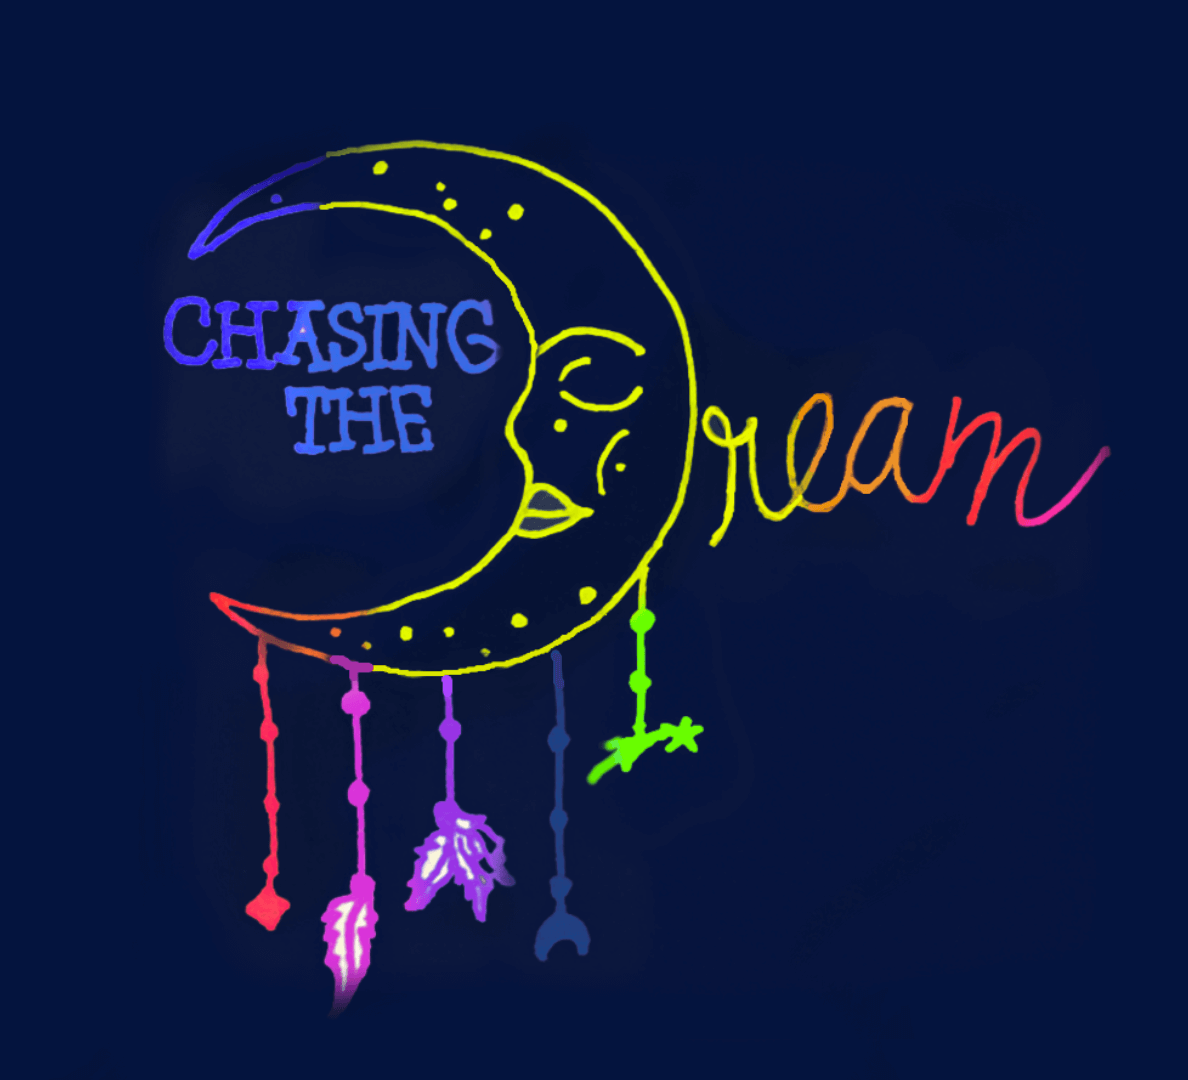 Chasing the dream